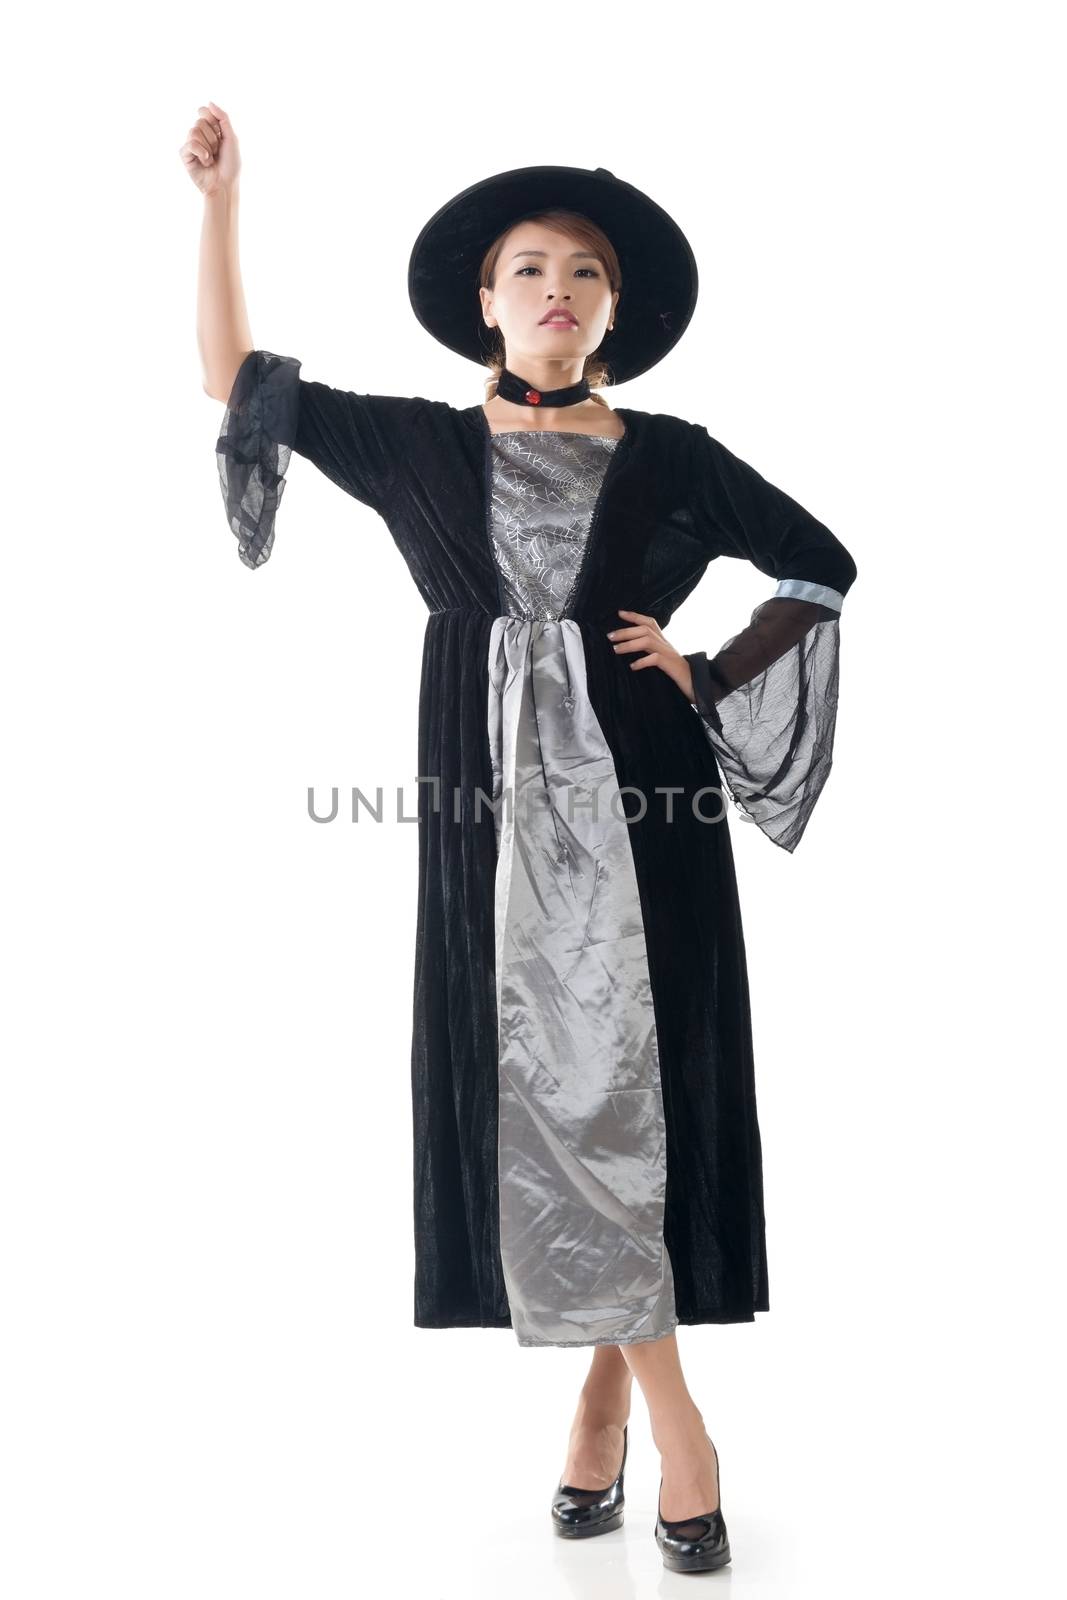 Asian witch hold something, full length portrait isolated on white.